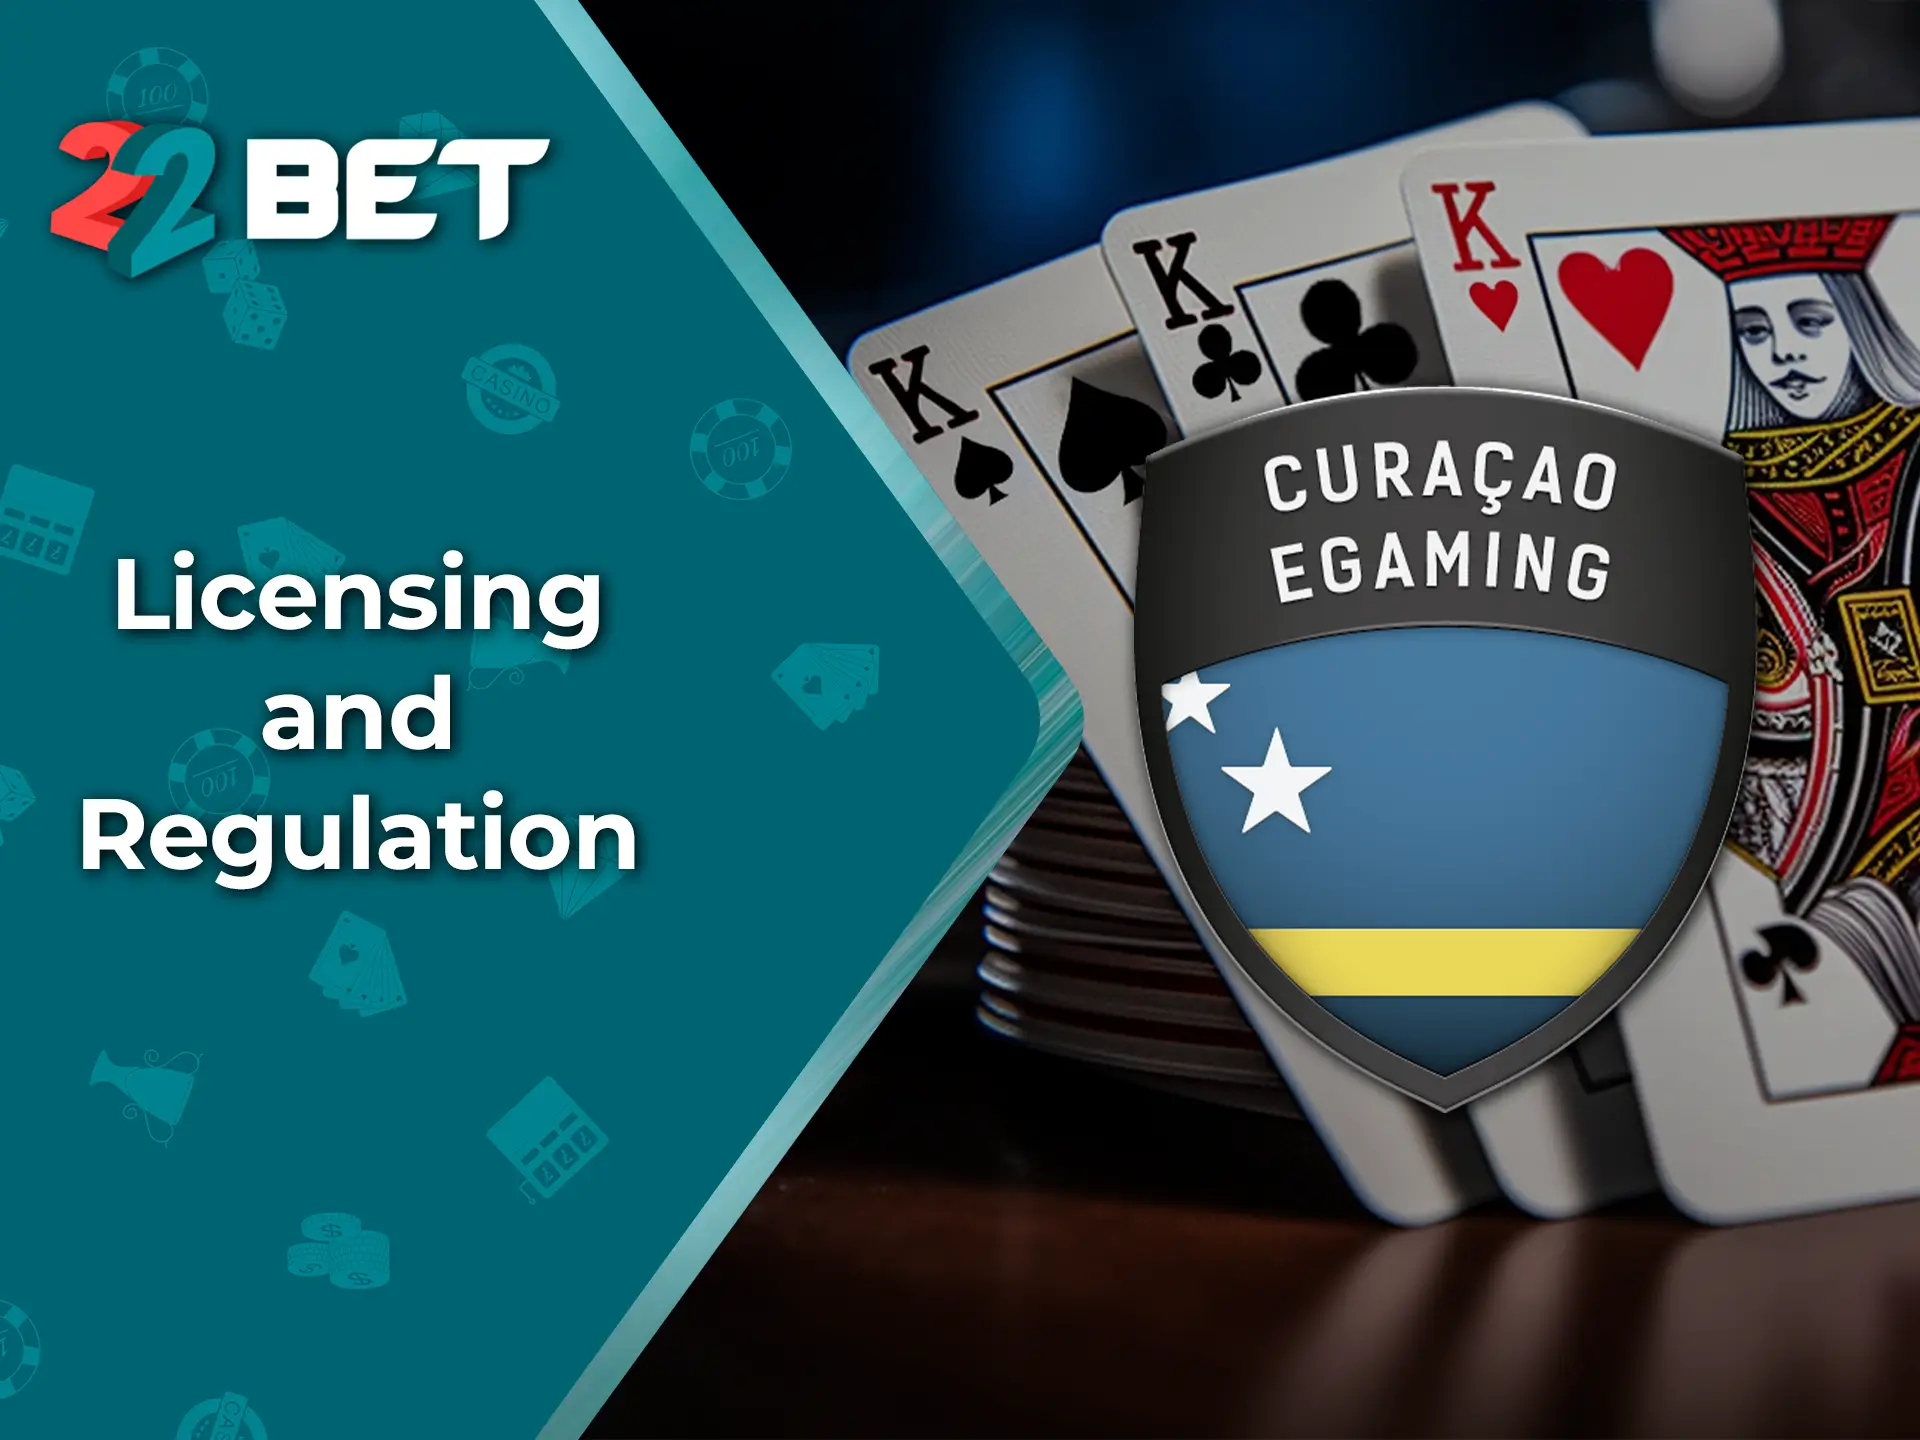 22Bet is a verified casino with all the licences required to operate.